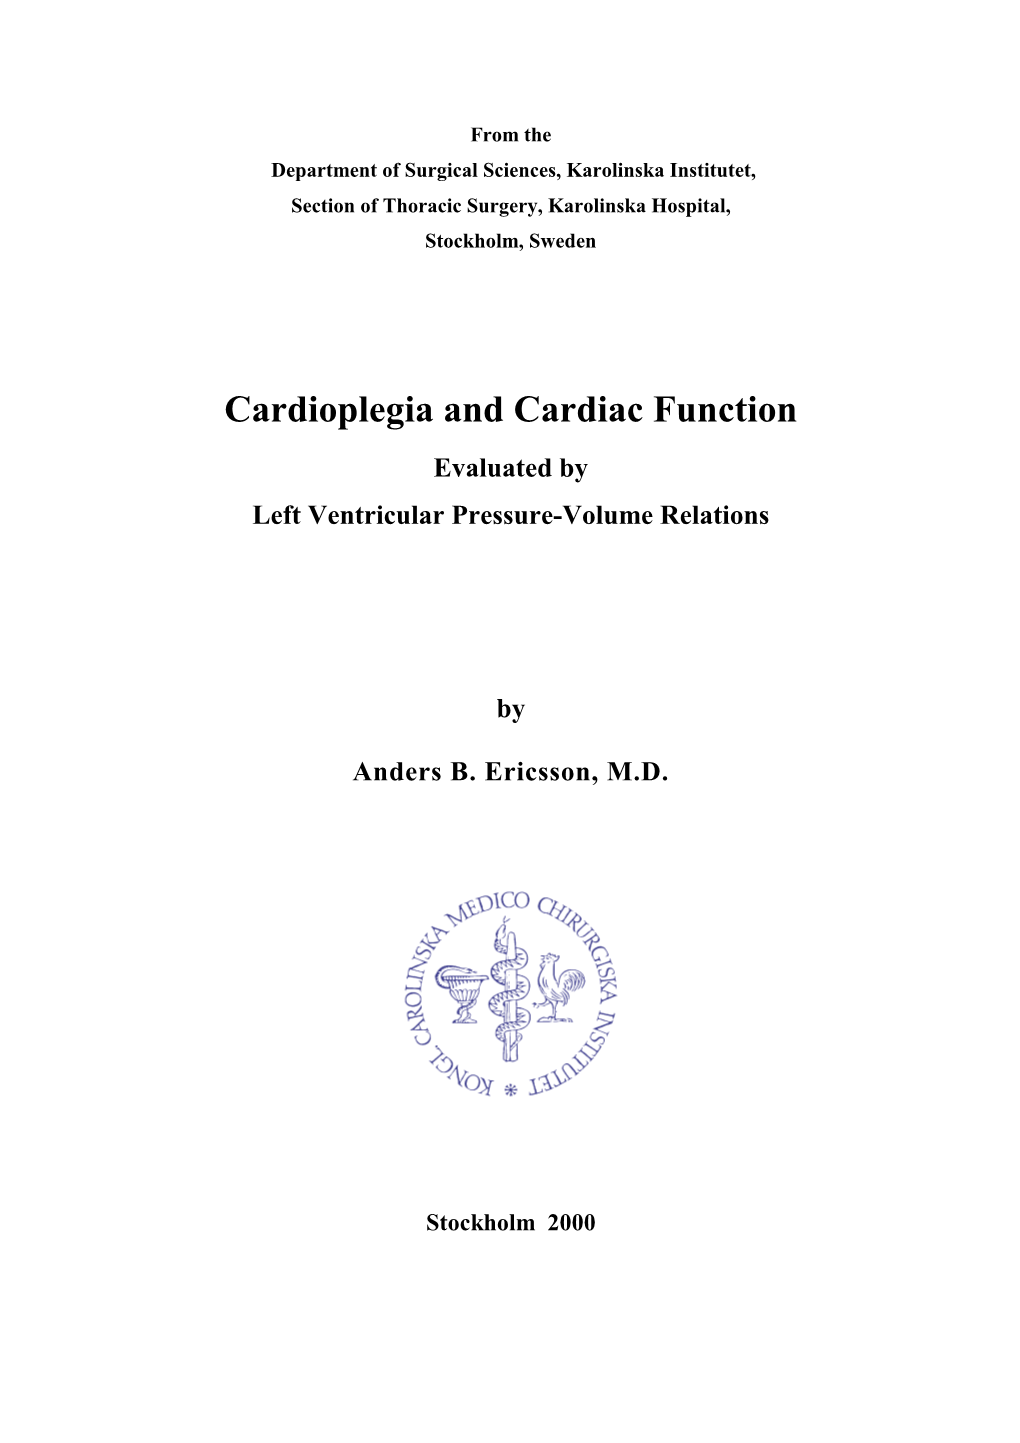 Cardioplegia and Cardiac Function Evaluated by Left Ventricular Pressure-Volume Relations